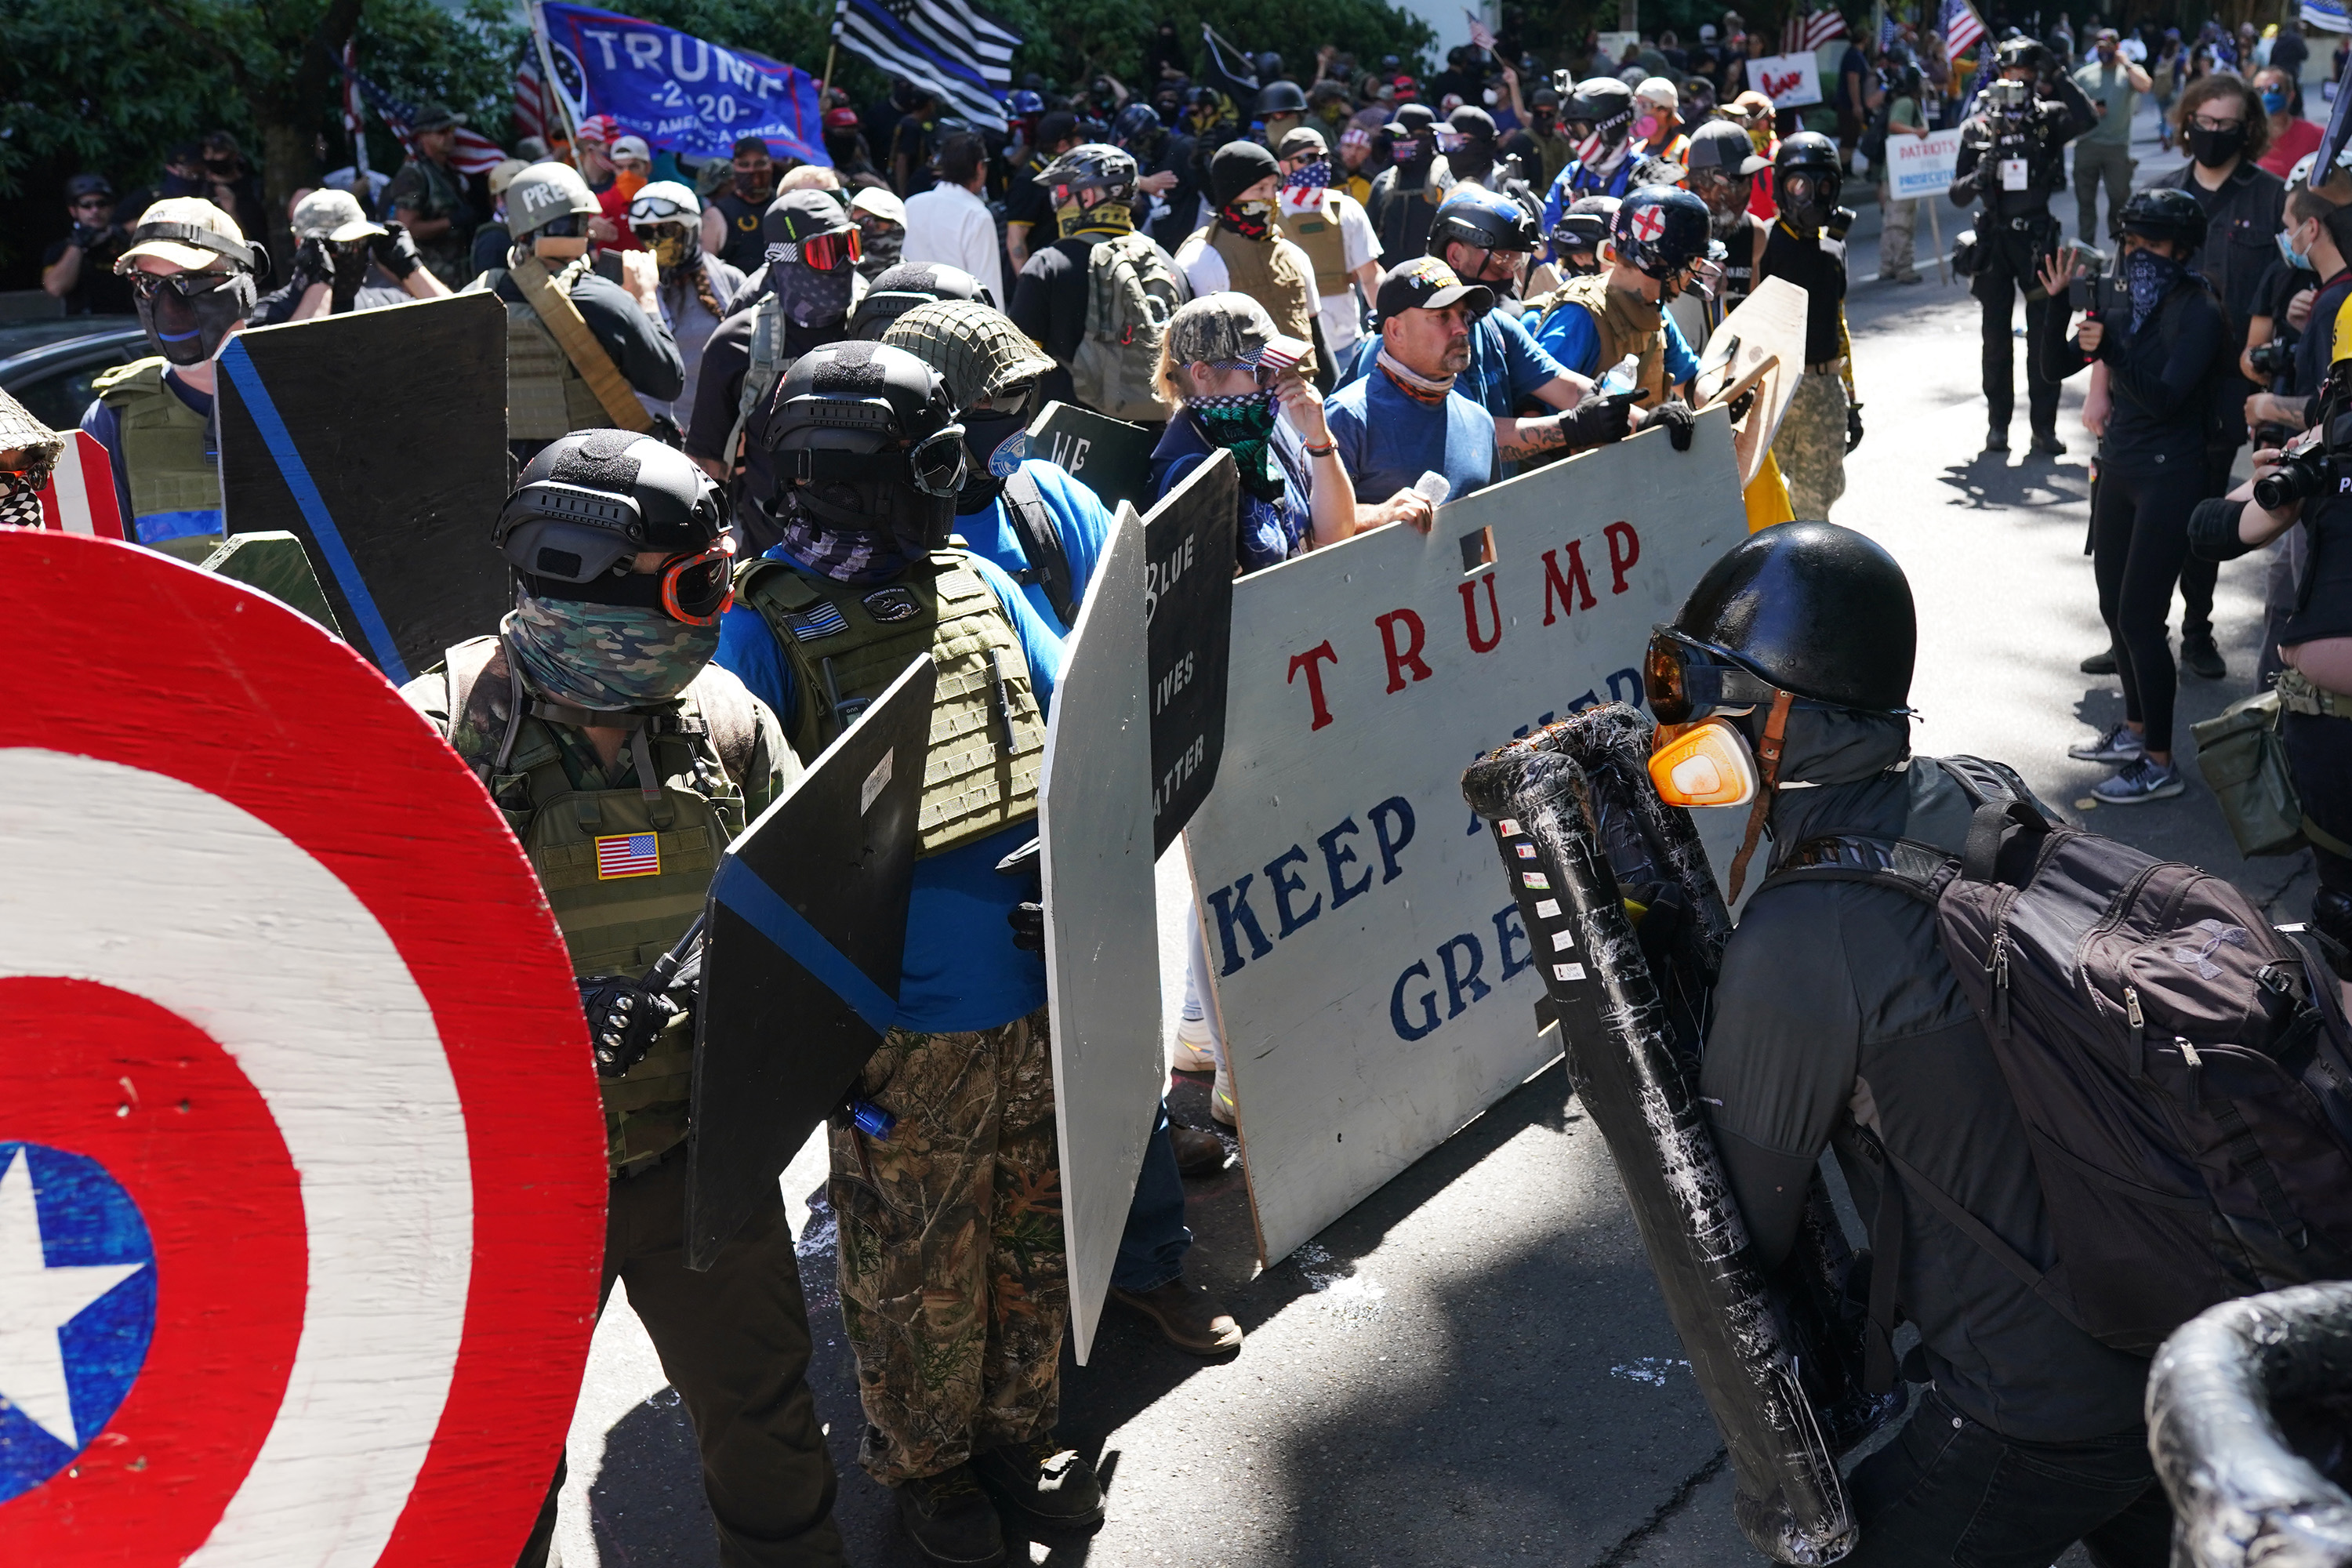 PORTLAND, OR - AUGUST 22: Right wing groups, left, and Portland anti-police protesters face off in front of the Multnomah County Justice Center on August 22, 2020 in Portland, Oregon. For the second Saturday in a row, right wing groups gathered in downtown Portland, sparking counter protests and violence. (Photo by Nathan Howard/Getty Images)